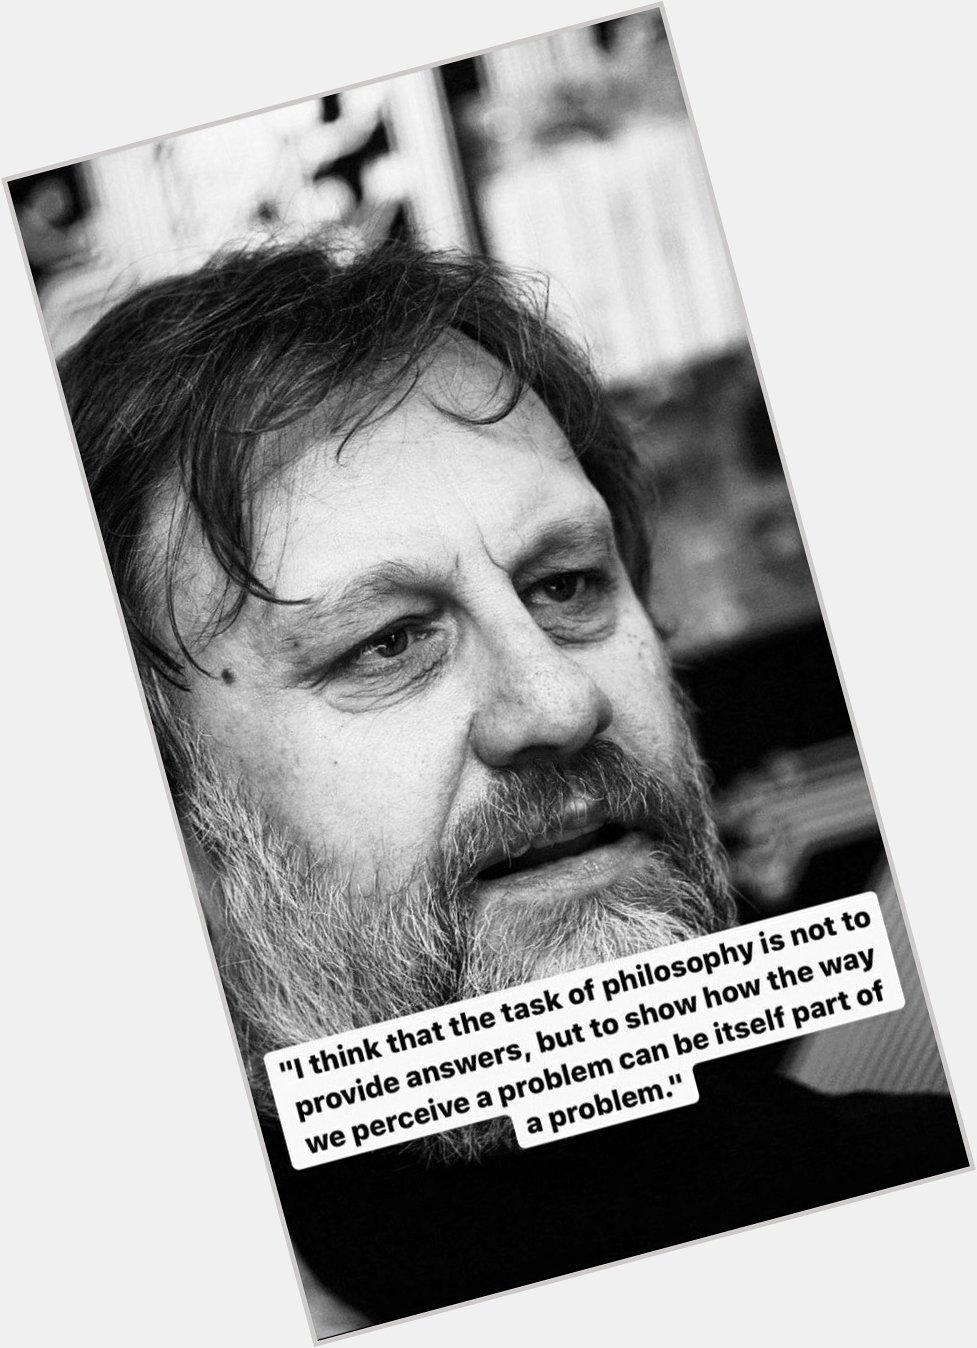 Happy Birthday Slavoj Zizek! One of the most influential and important people 